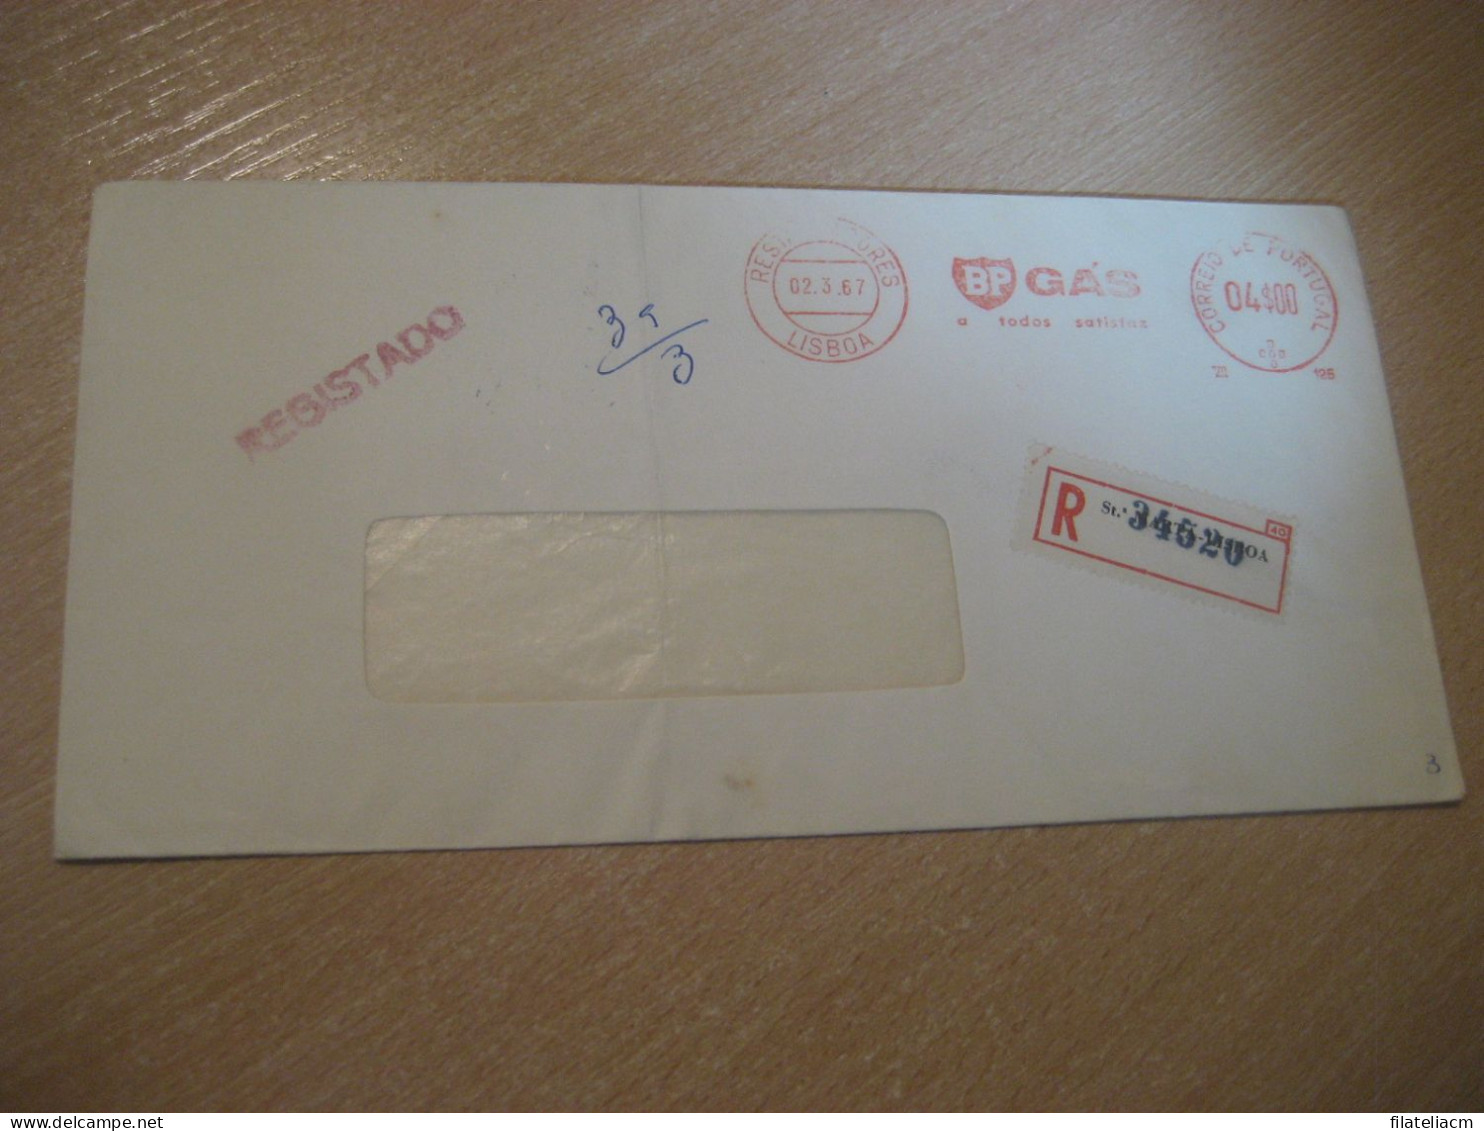 LISBOA 1967 BP Gas Oil Registered Meter Mail Cancel Cover PORTUGAL - Covers & Documents